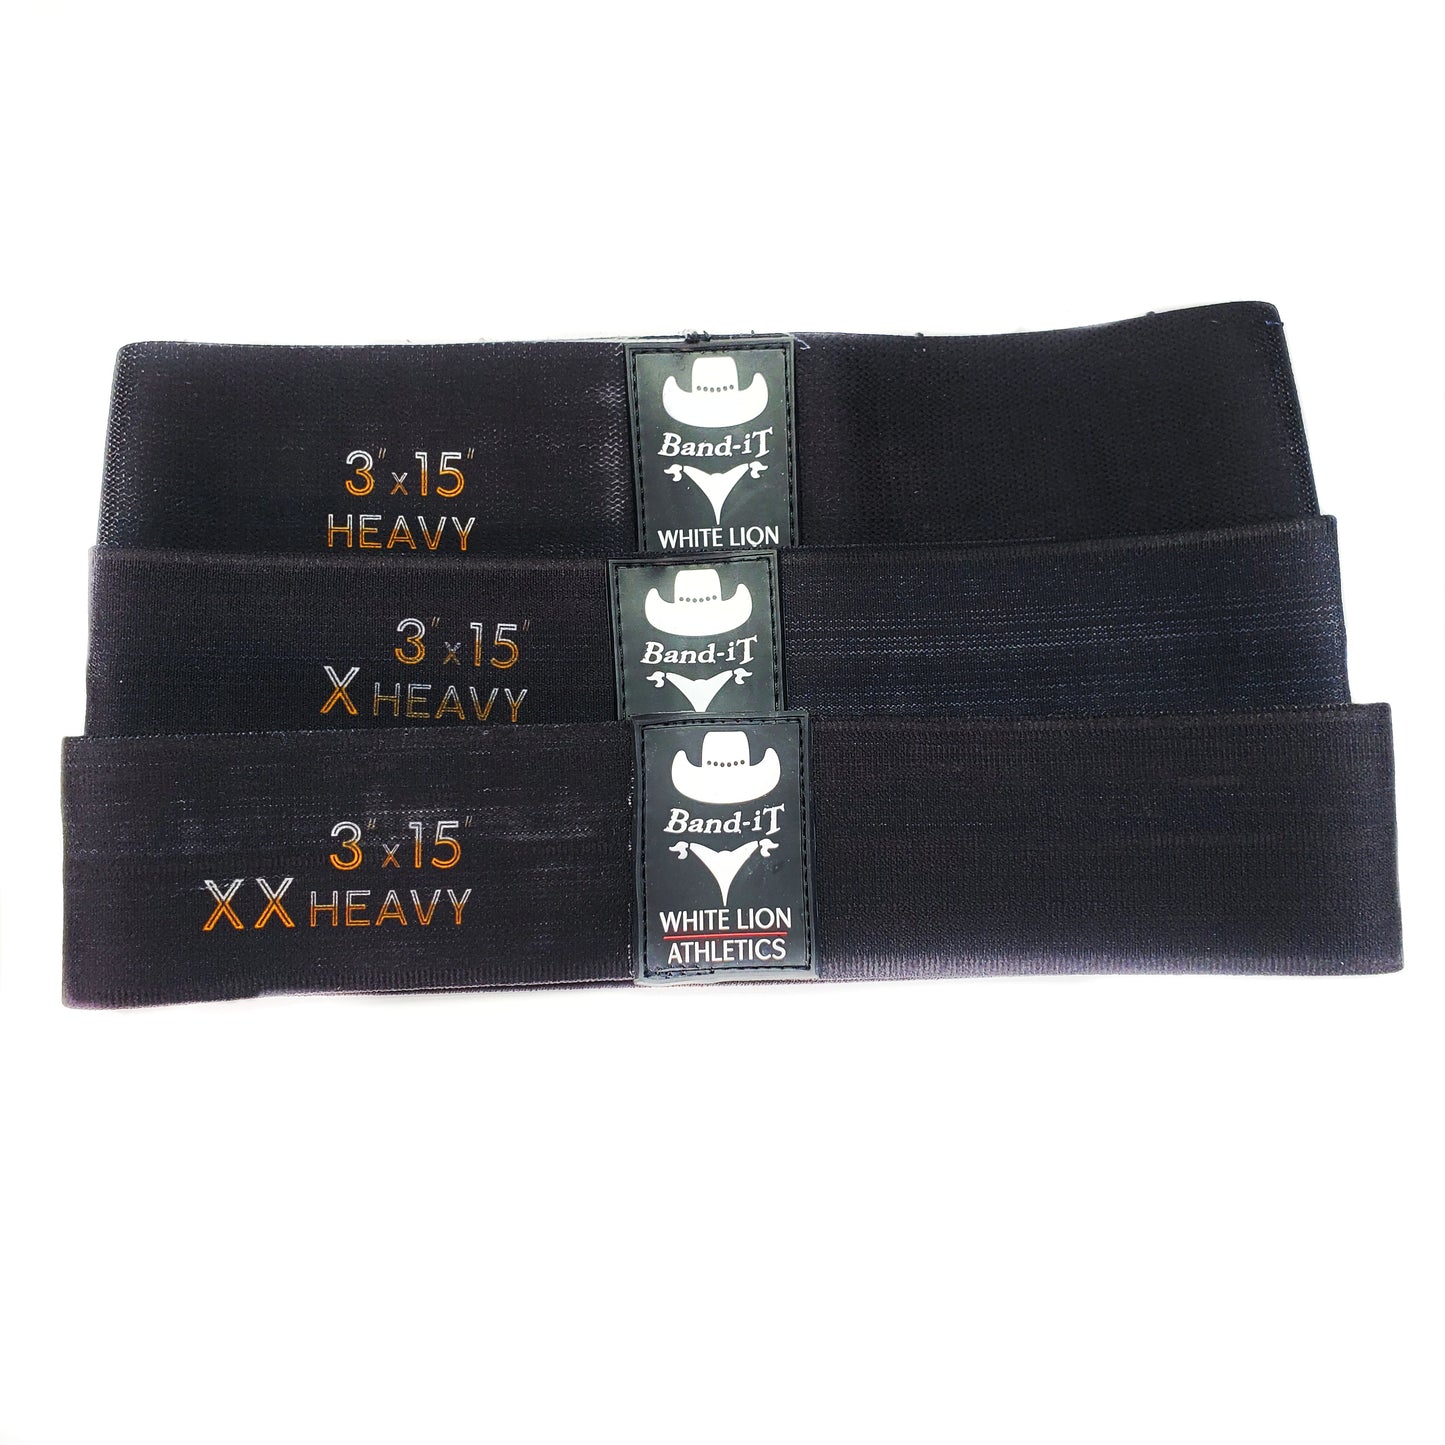 The Ultimate Band Box - CLASSIC BLACK :  3 Pack Fabric Glute Band Resistance Band Kit - White Lion Athletics